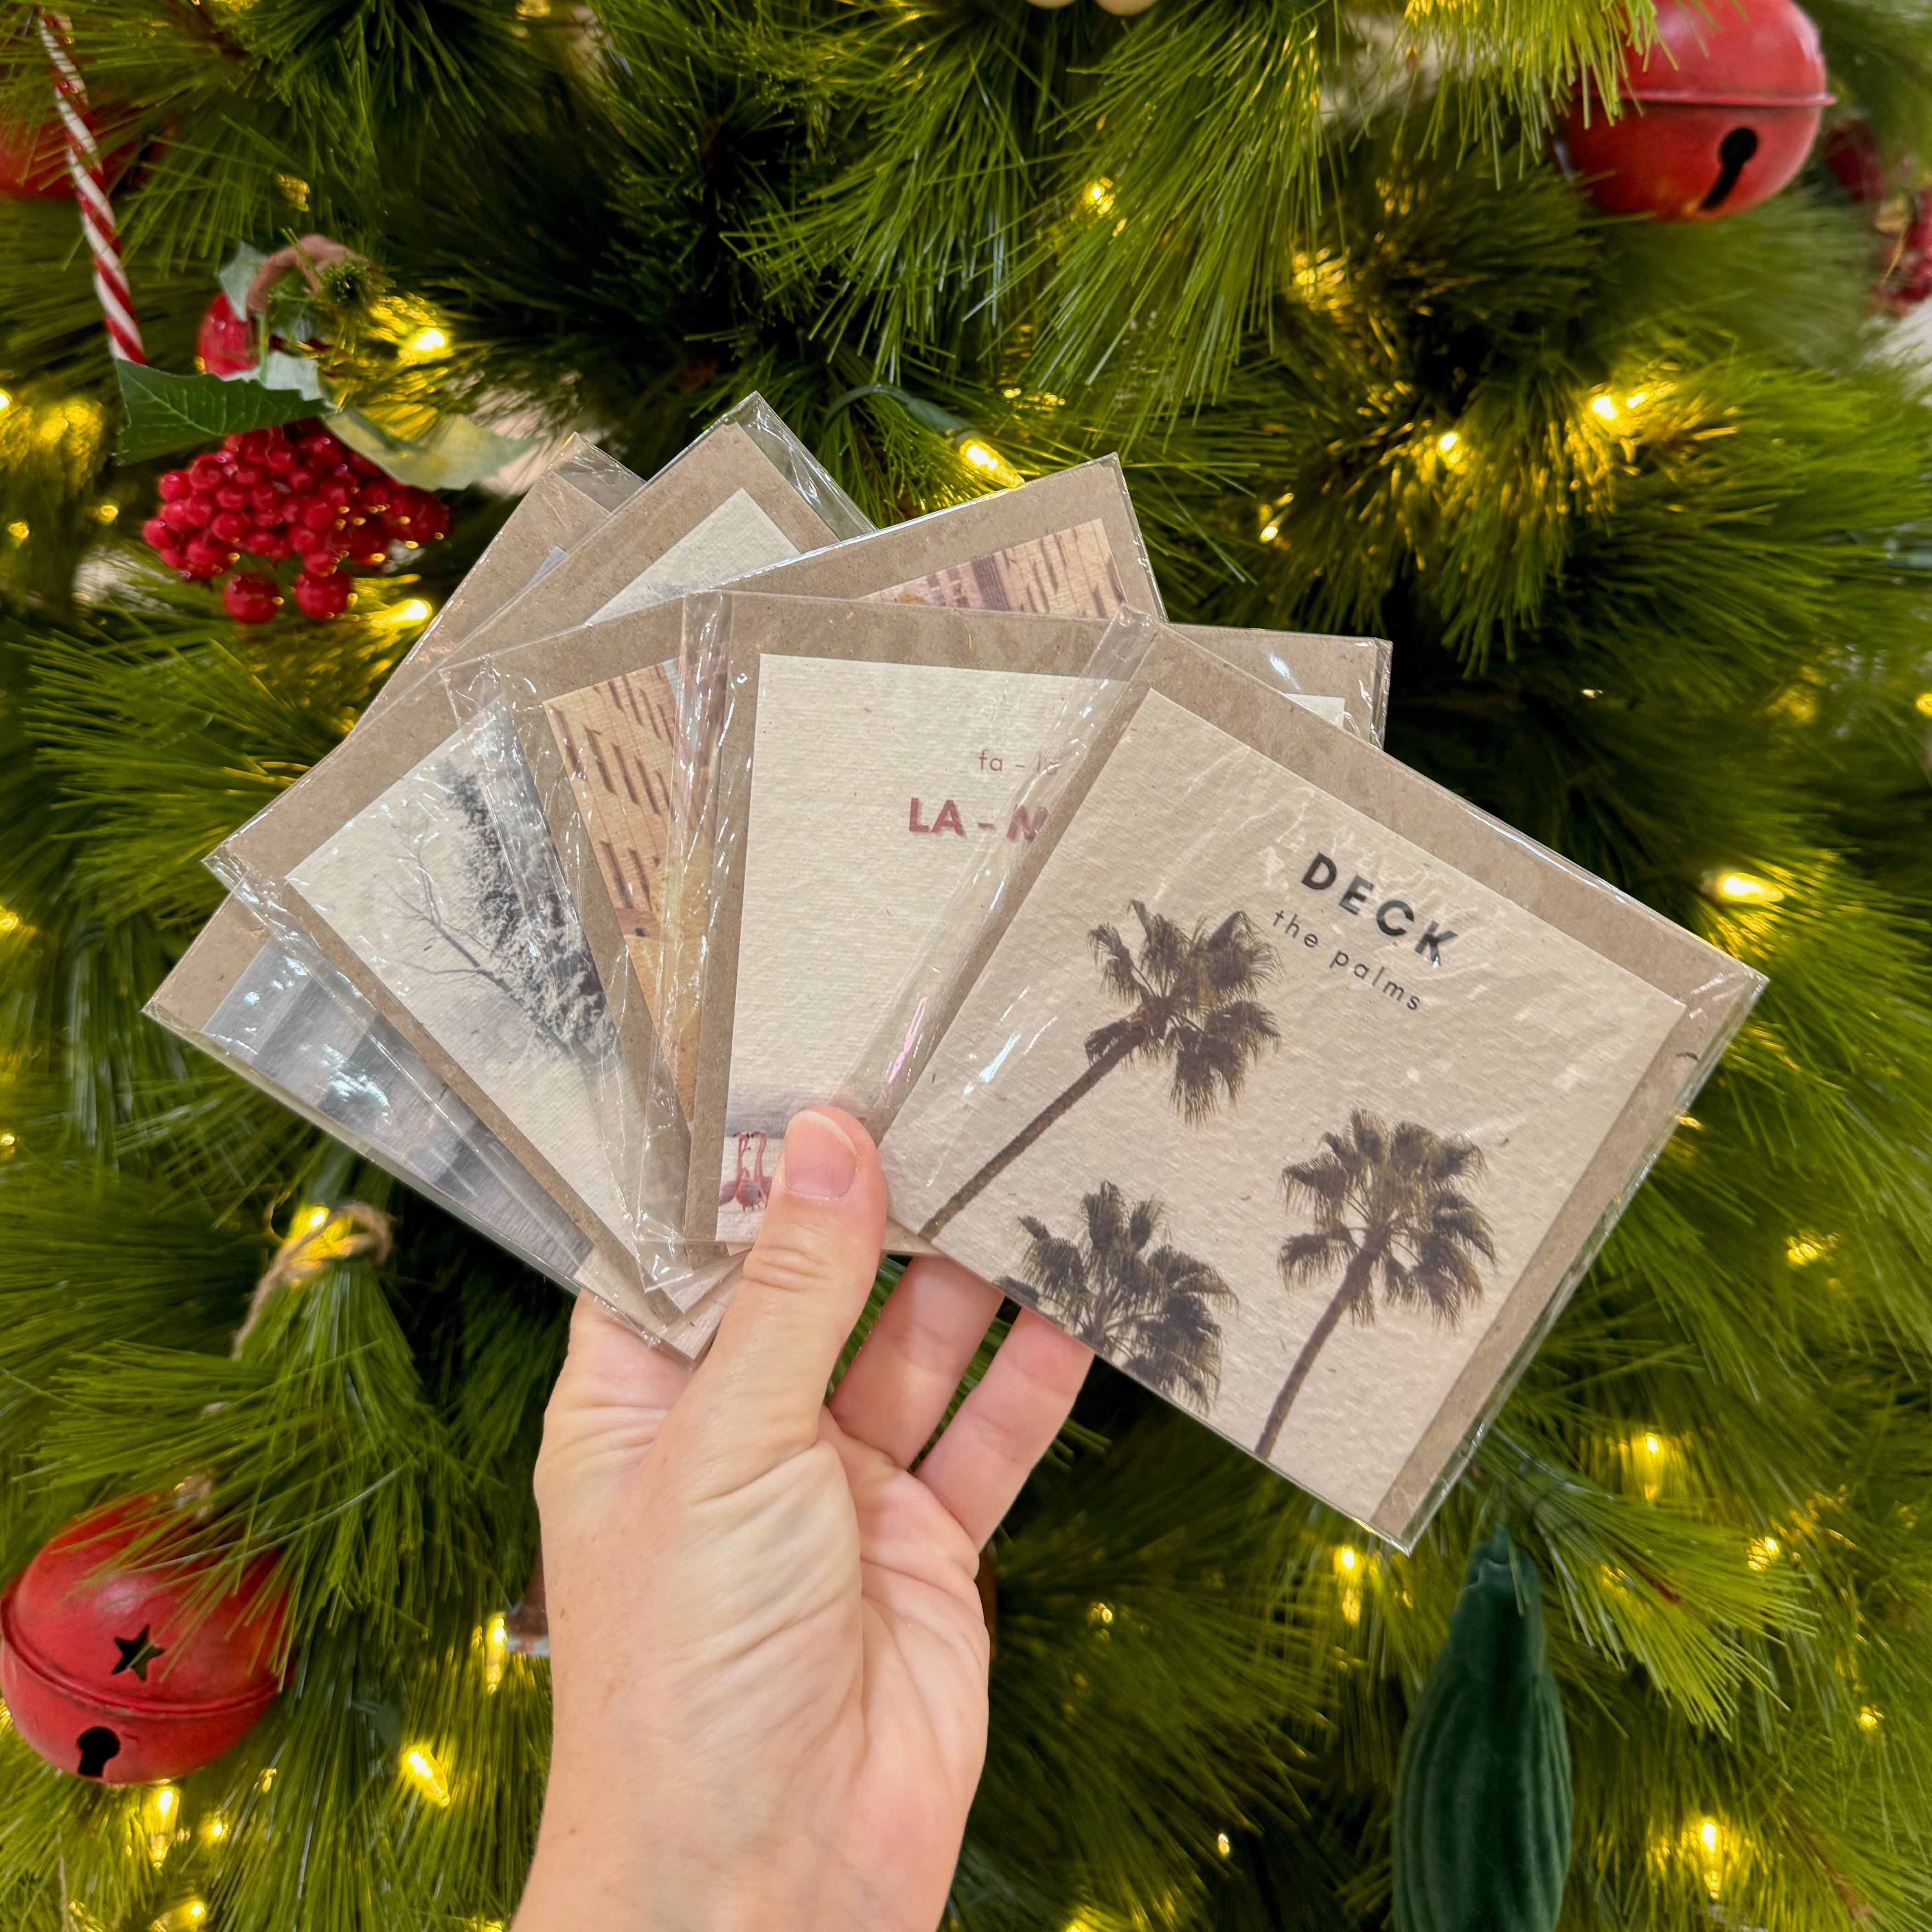 Wanderlust Prints Unveiled Exclusive Christmas Plantable Cards with Plantacard Partnership 🌍💌🌱